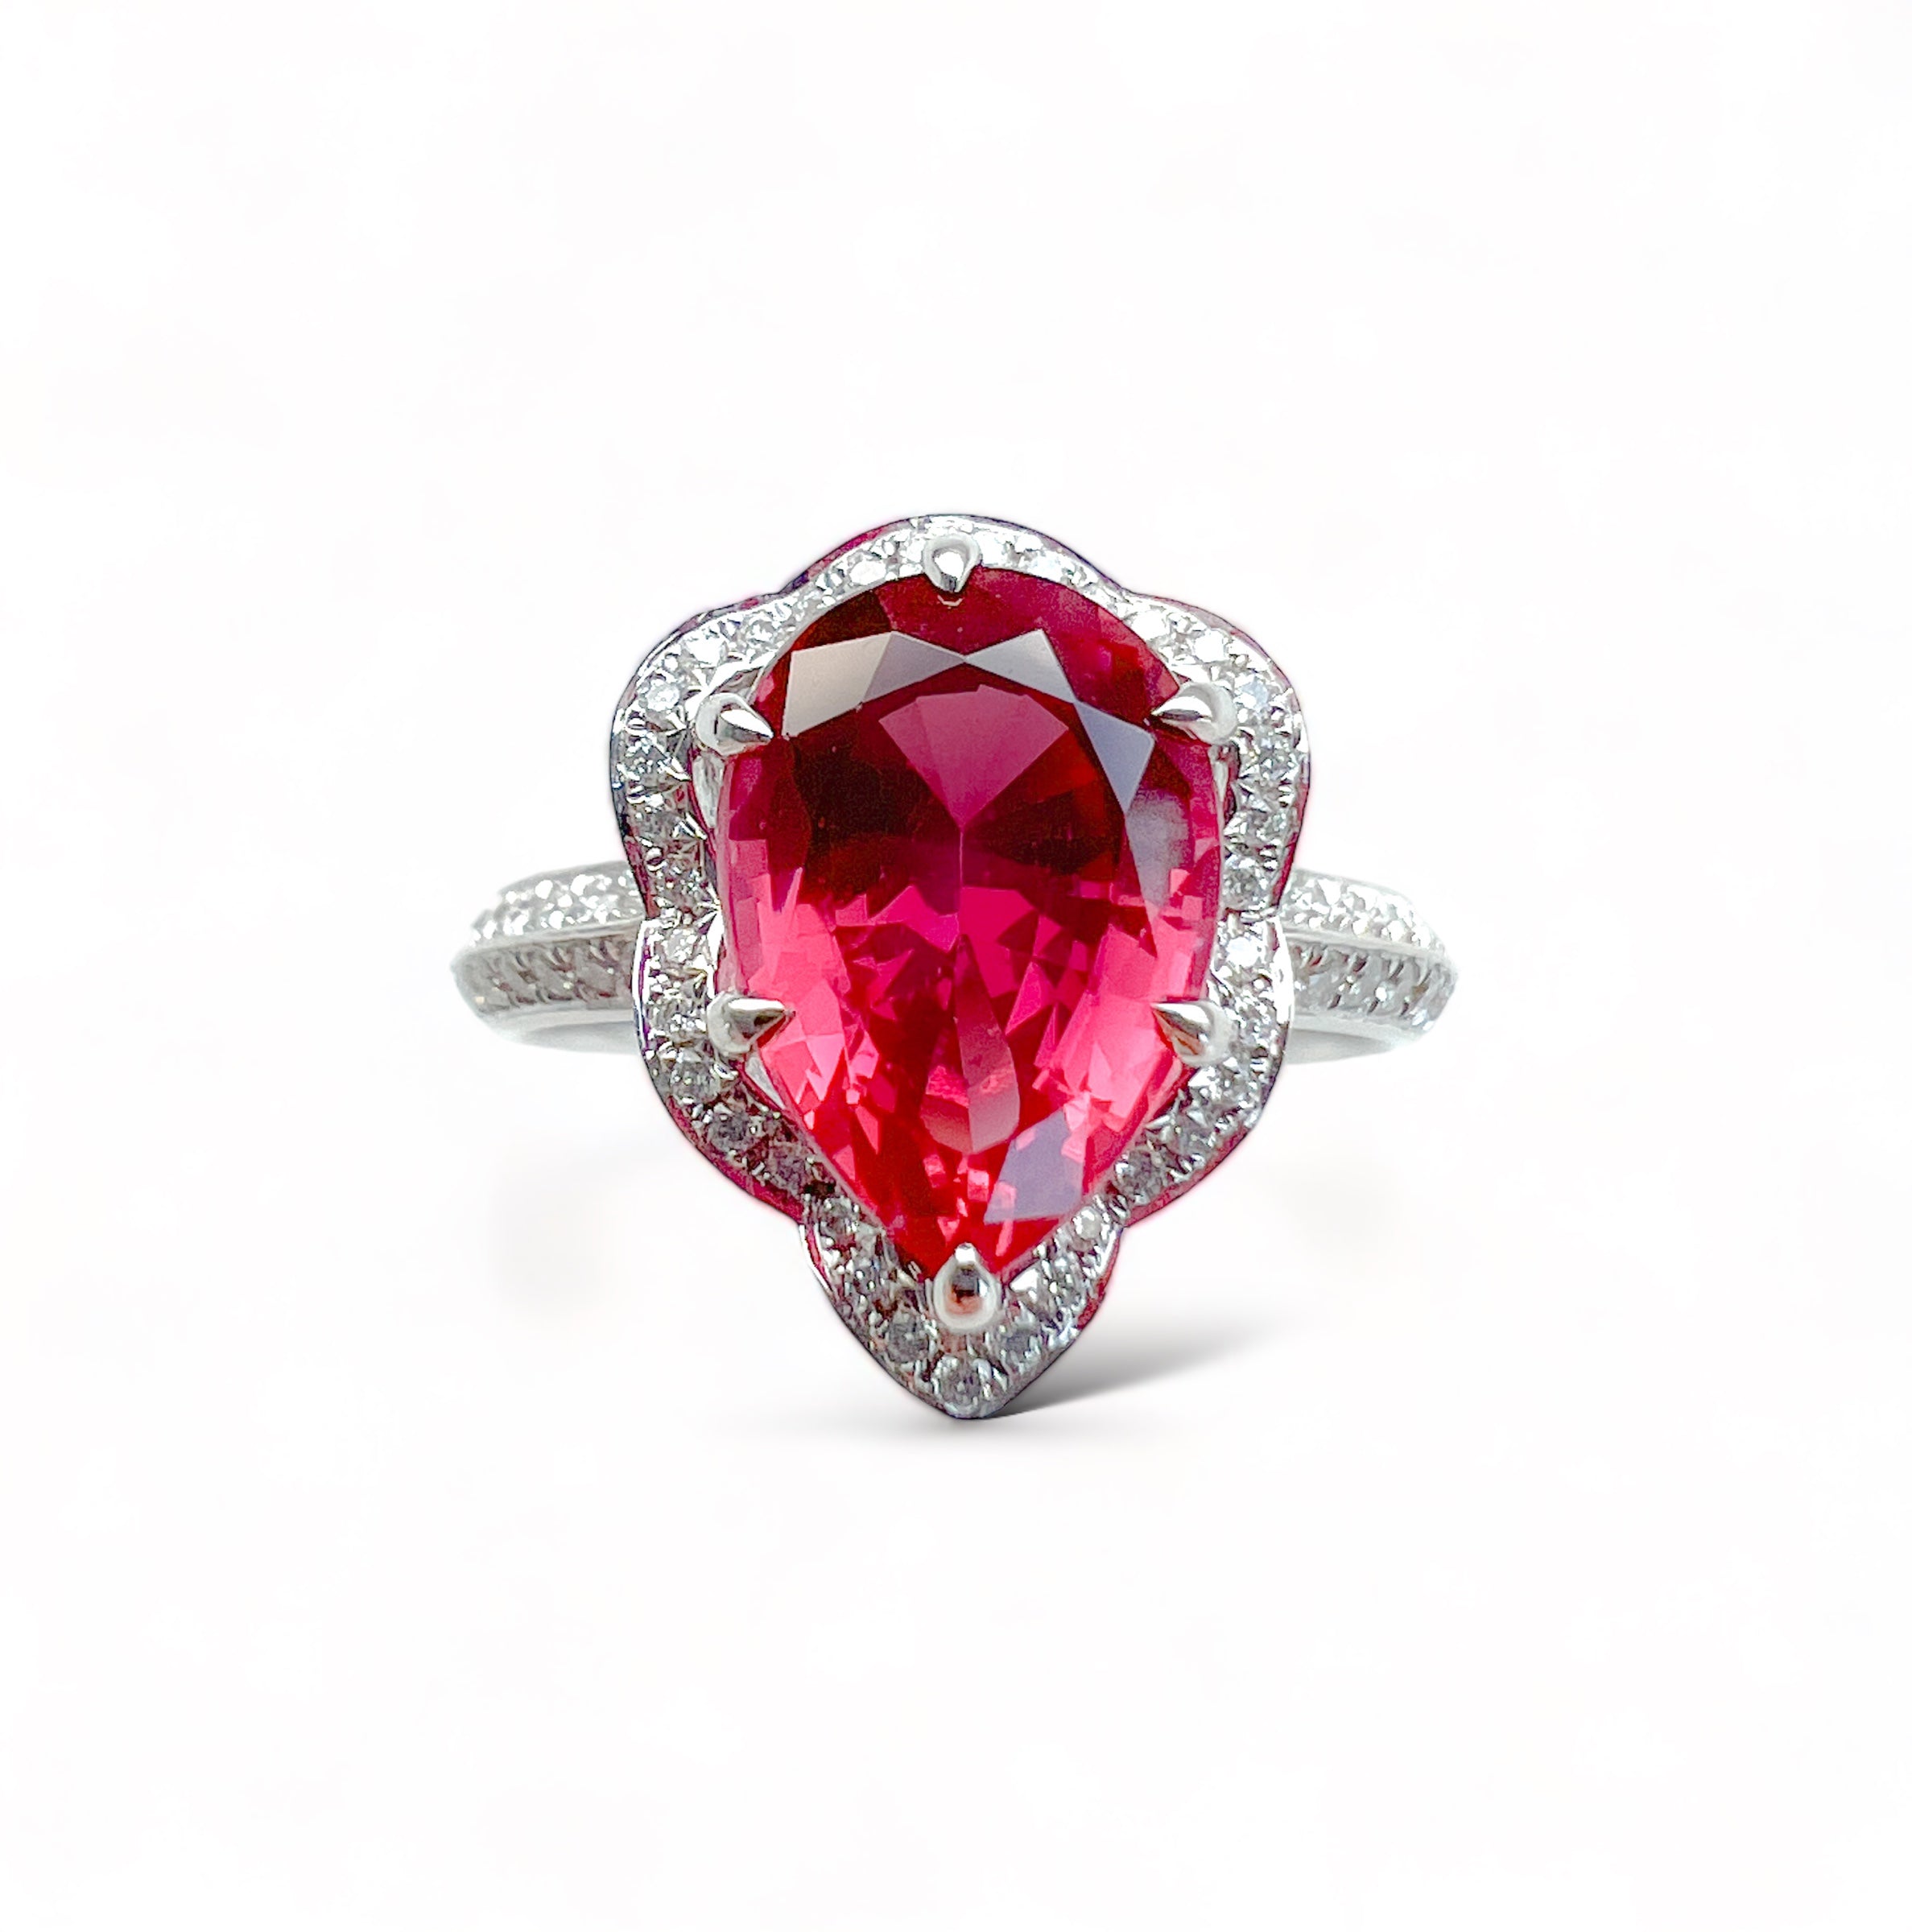 Red Spinel and diamond engagement ring, GIA certified red spinel ring, pink spinel cocktail ring